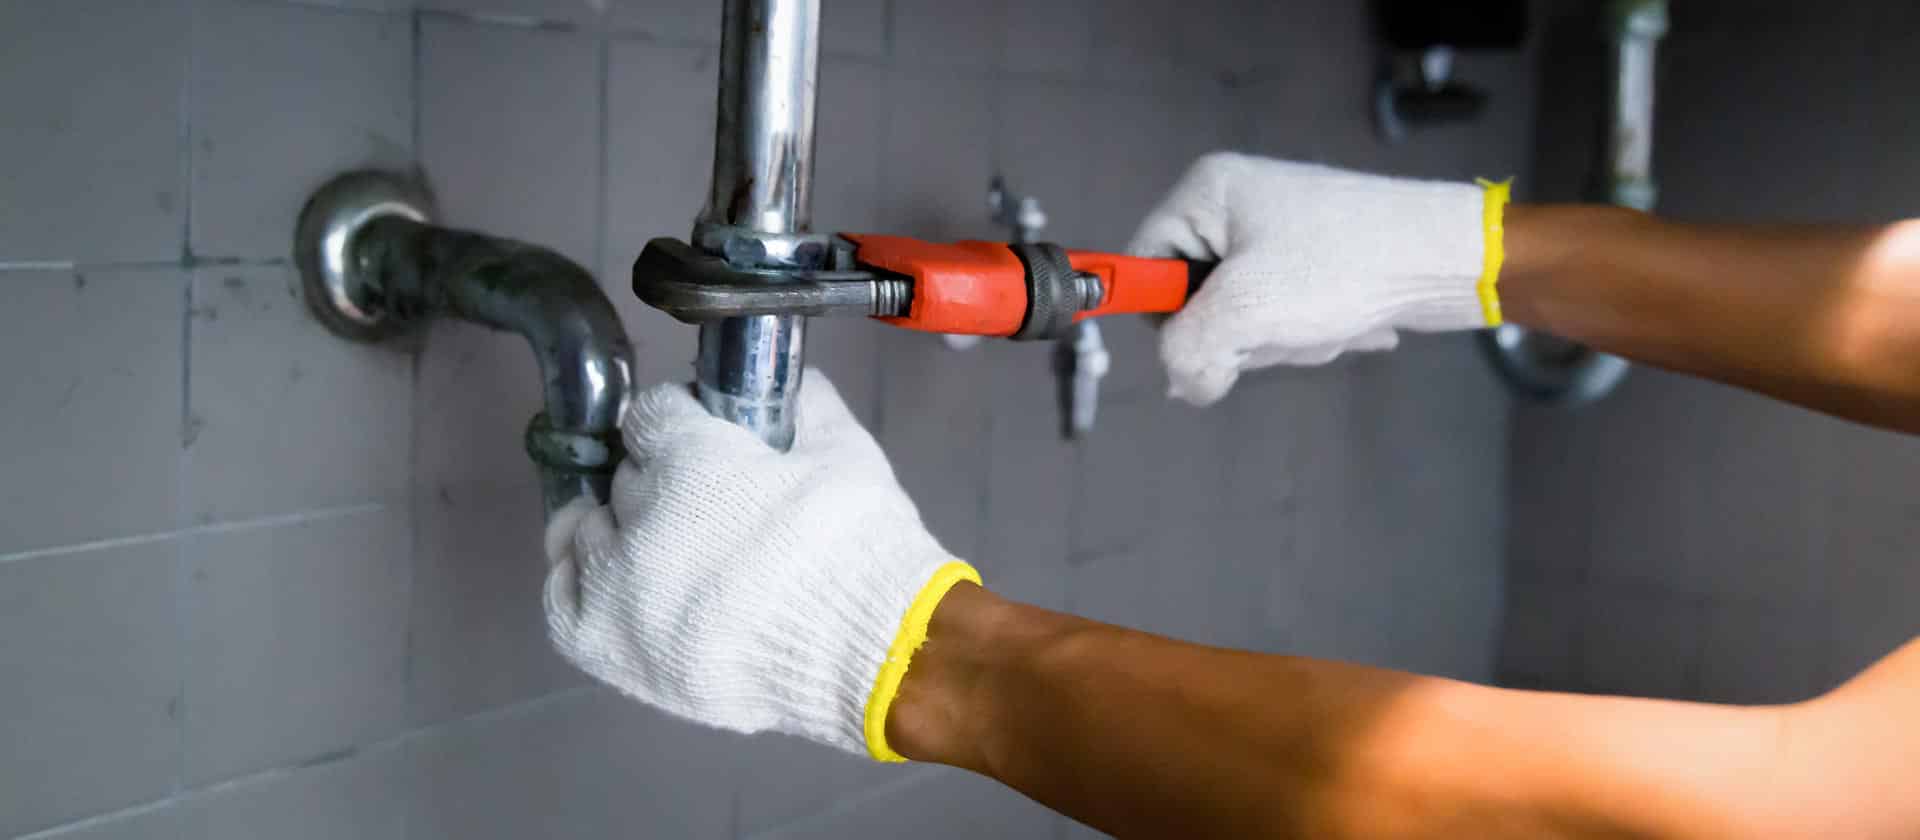 Plumber's Hand Repairing Sink Pipe Leakage With Adjustable Wrench.